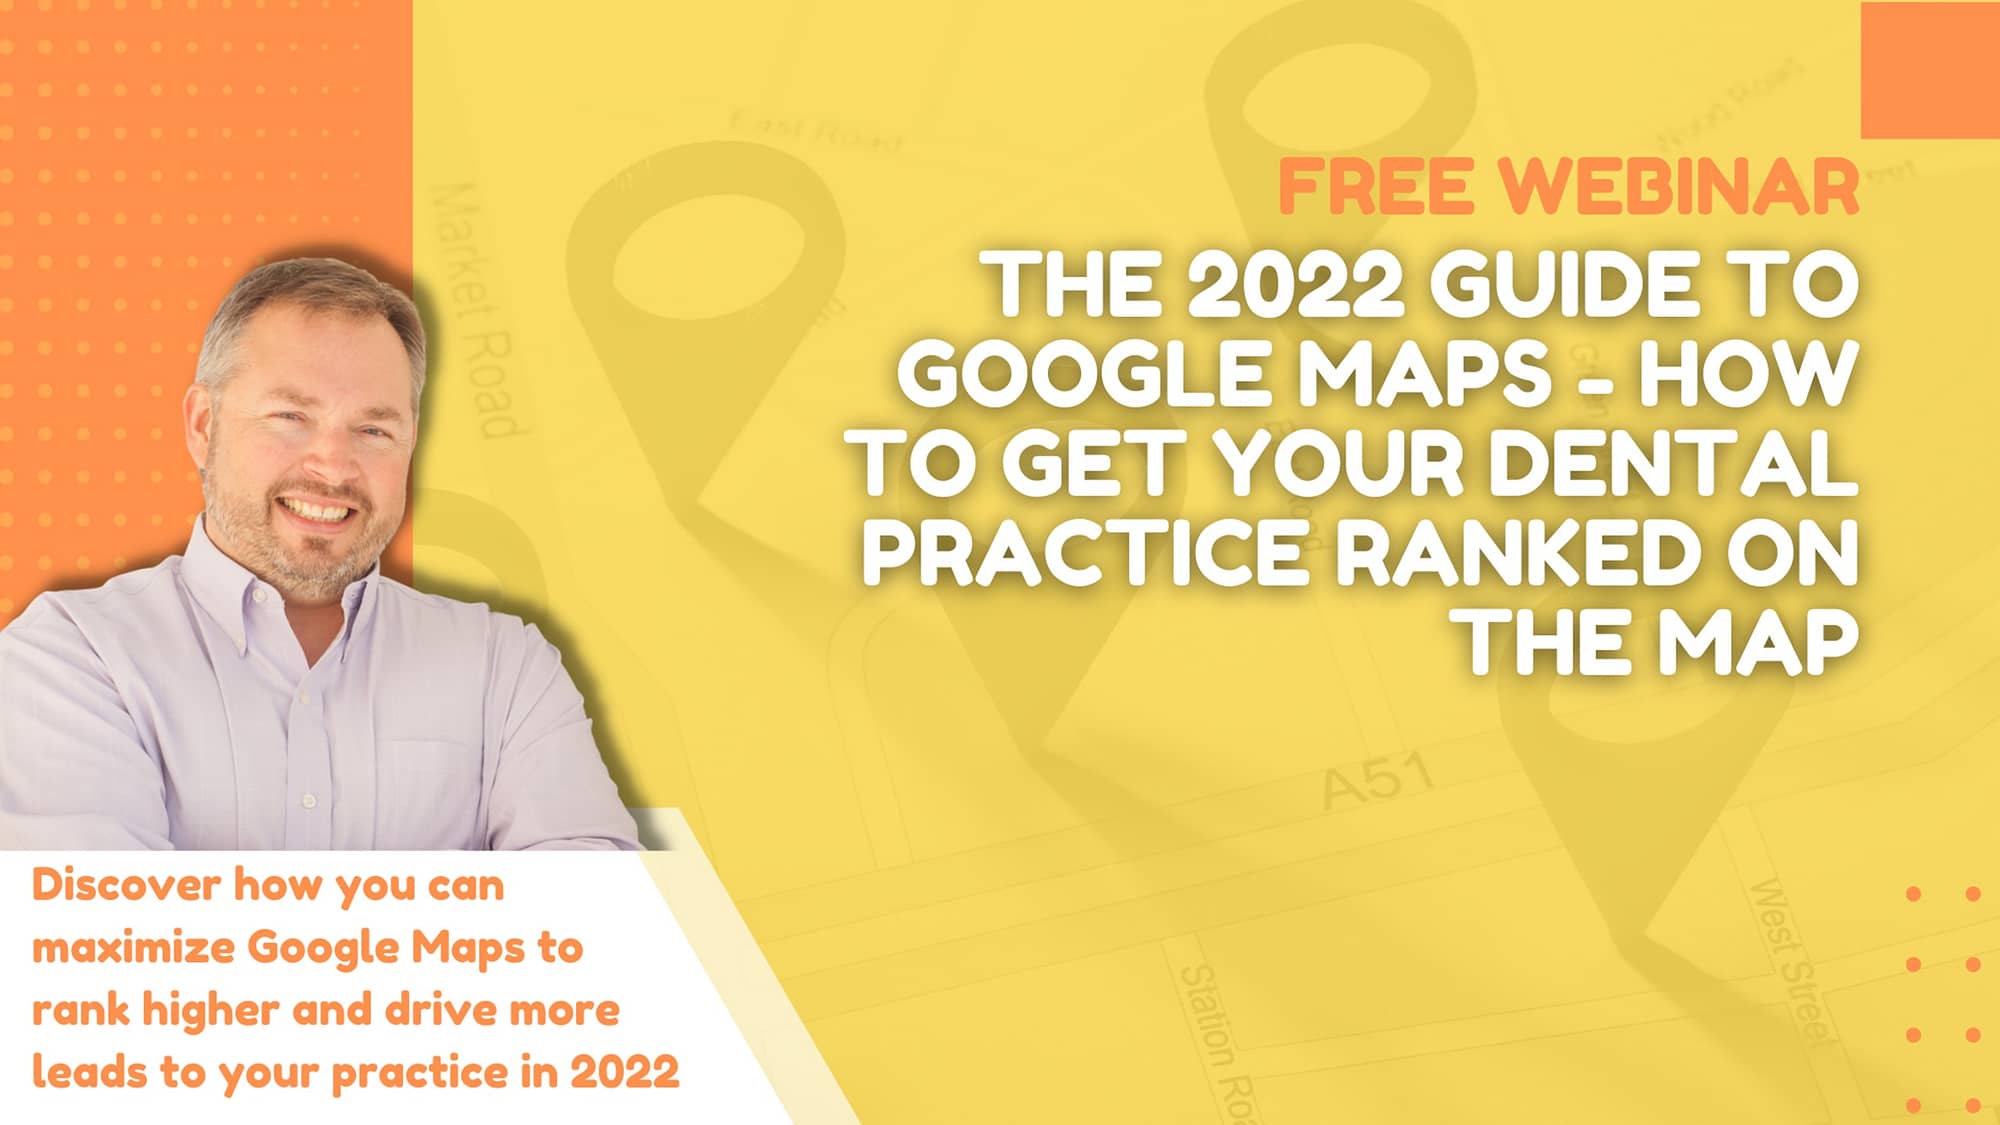 The 2022 Guide To Google Maps – How To Get Your Dental Practice Ranked On The Map